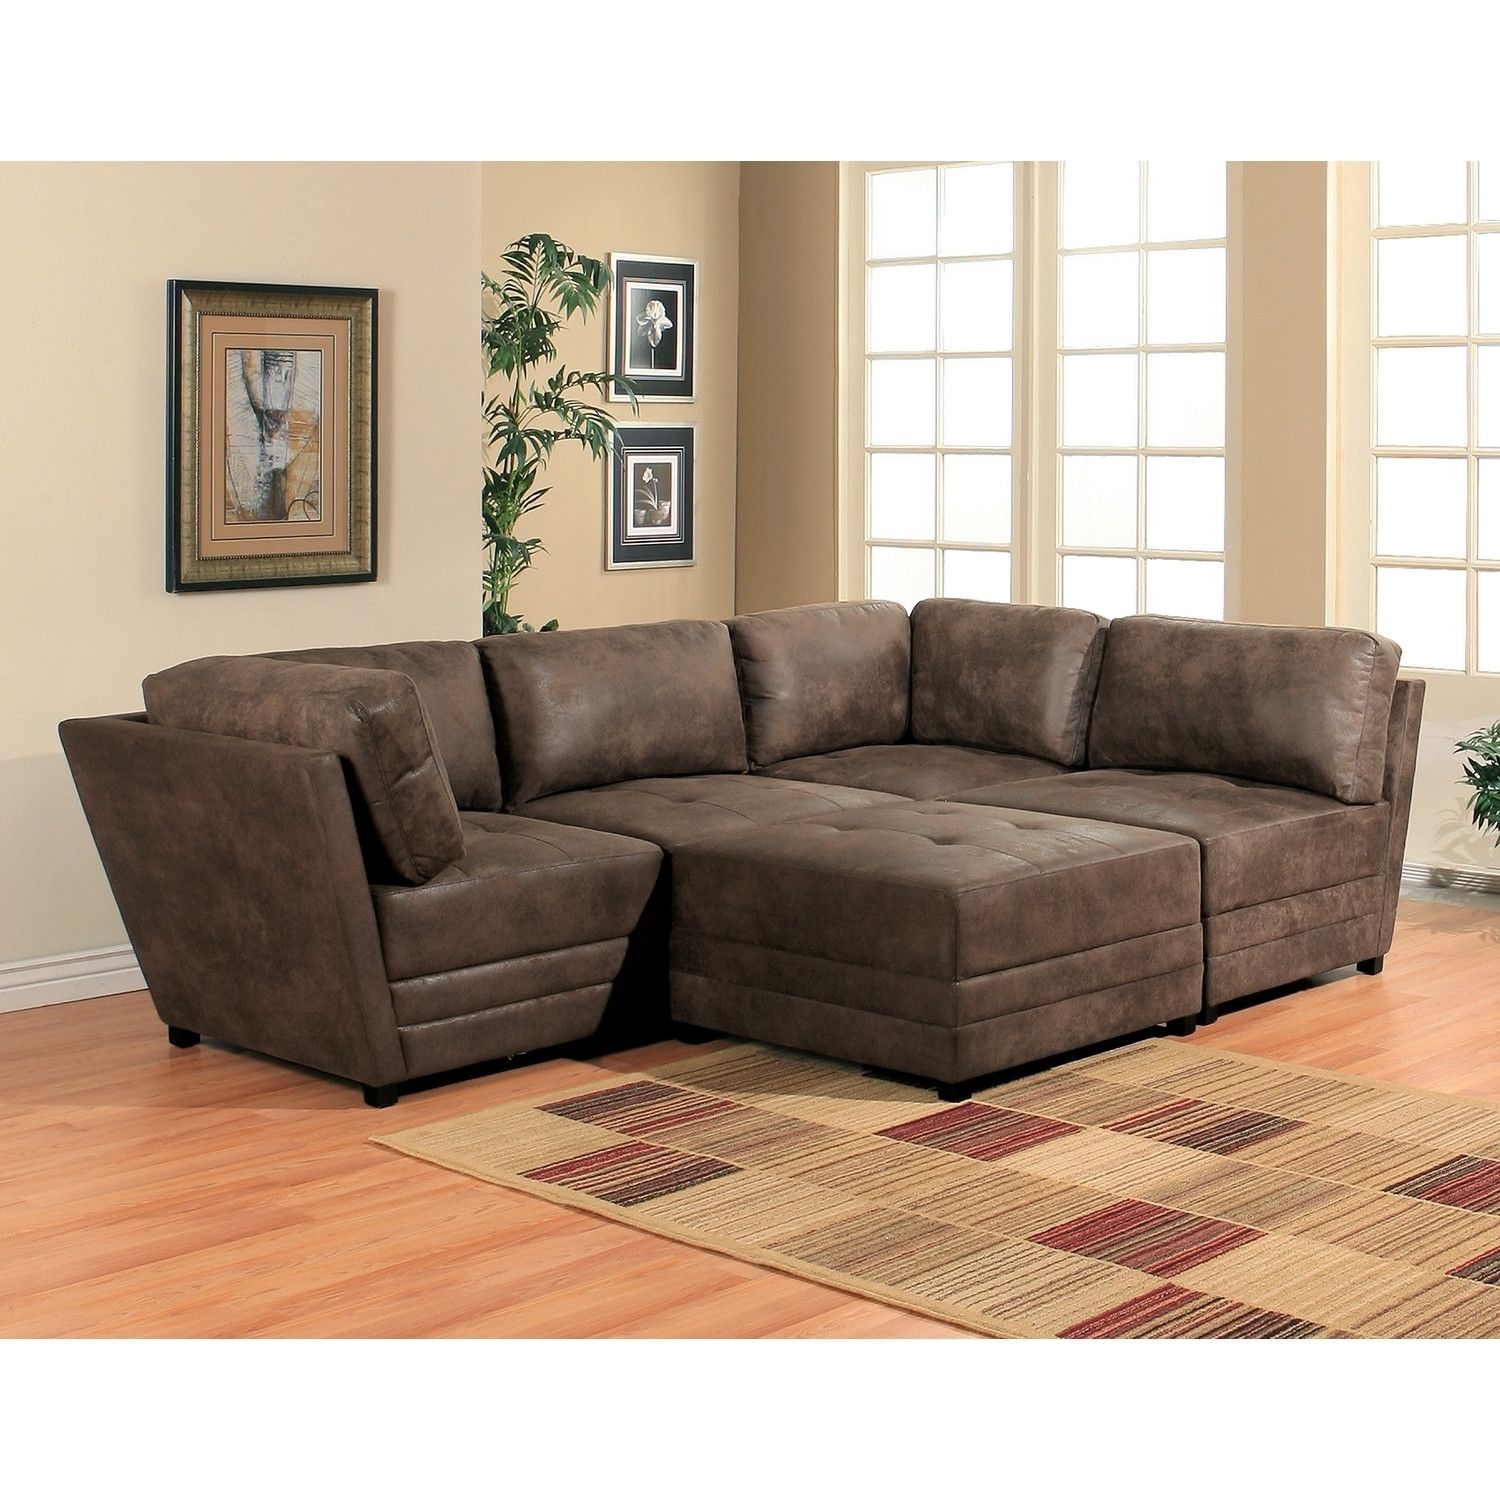 Photos Sectional Sofas Tucson – Buildsimplehome For Tucson Sectional Sofas (View 6 of 10)